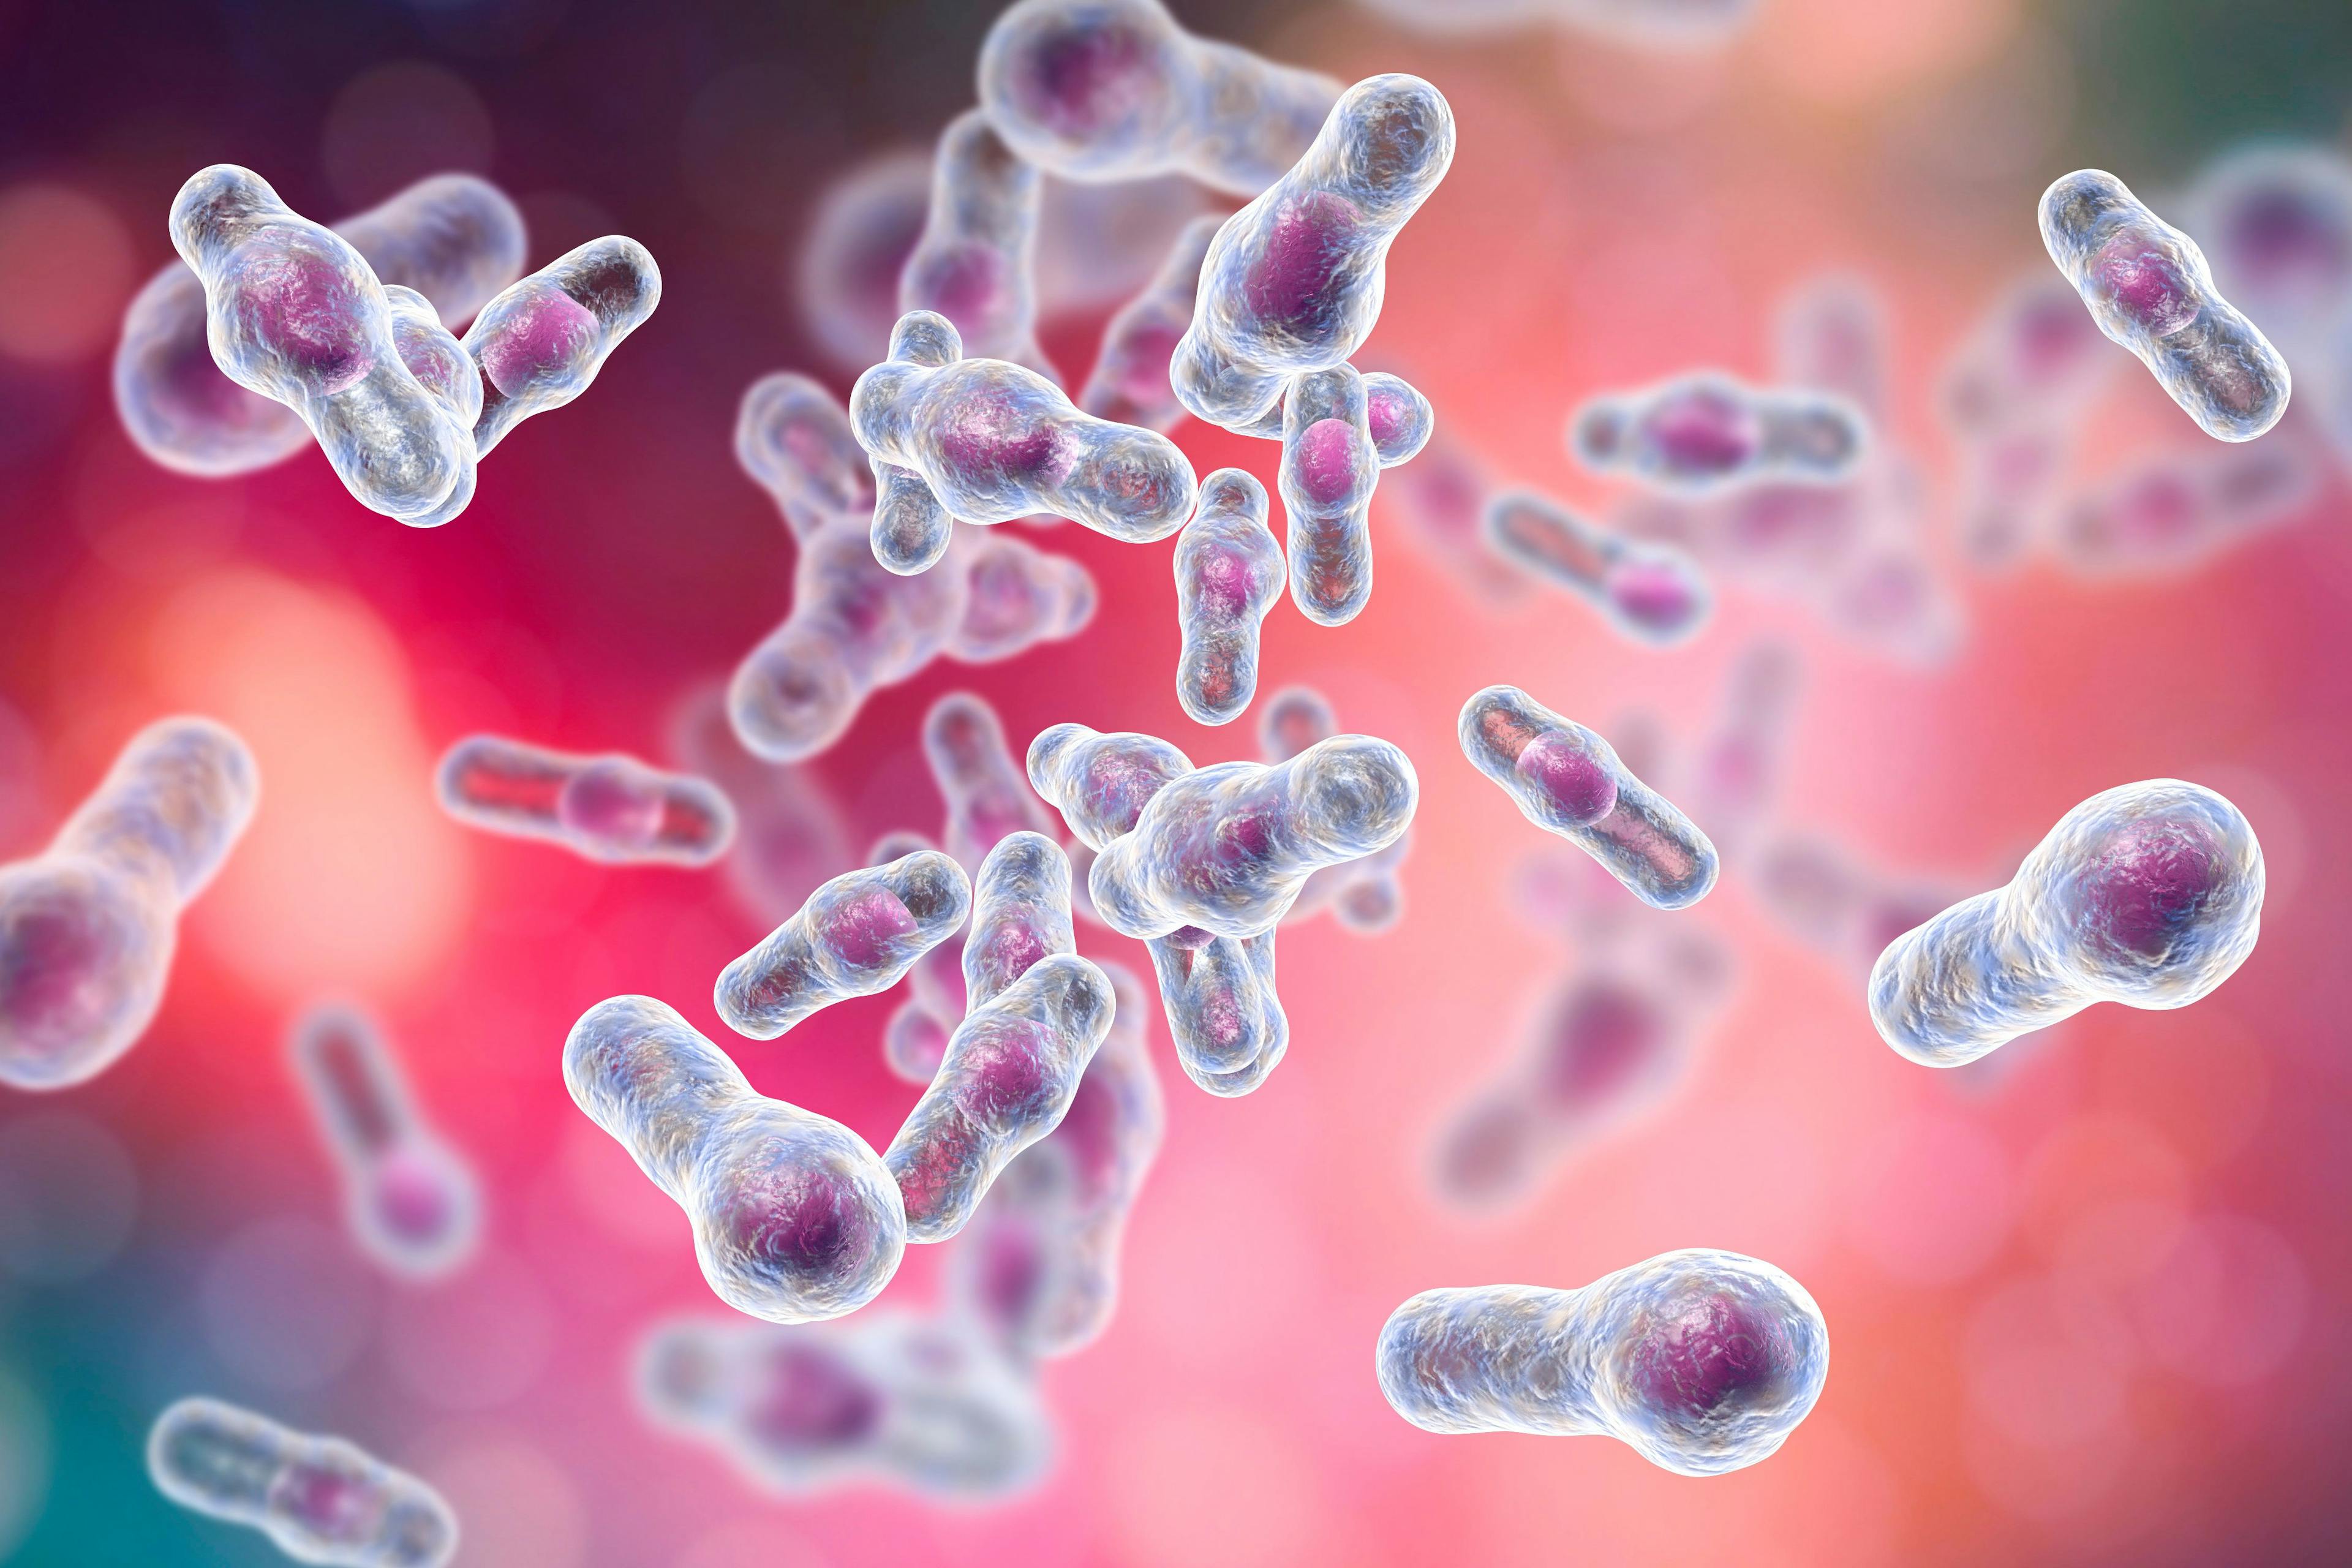 New, Accurate Detection Methods Necessary for Treating C. Difficile Infections